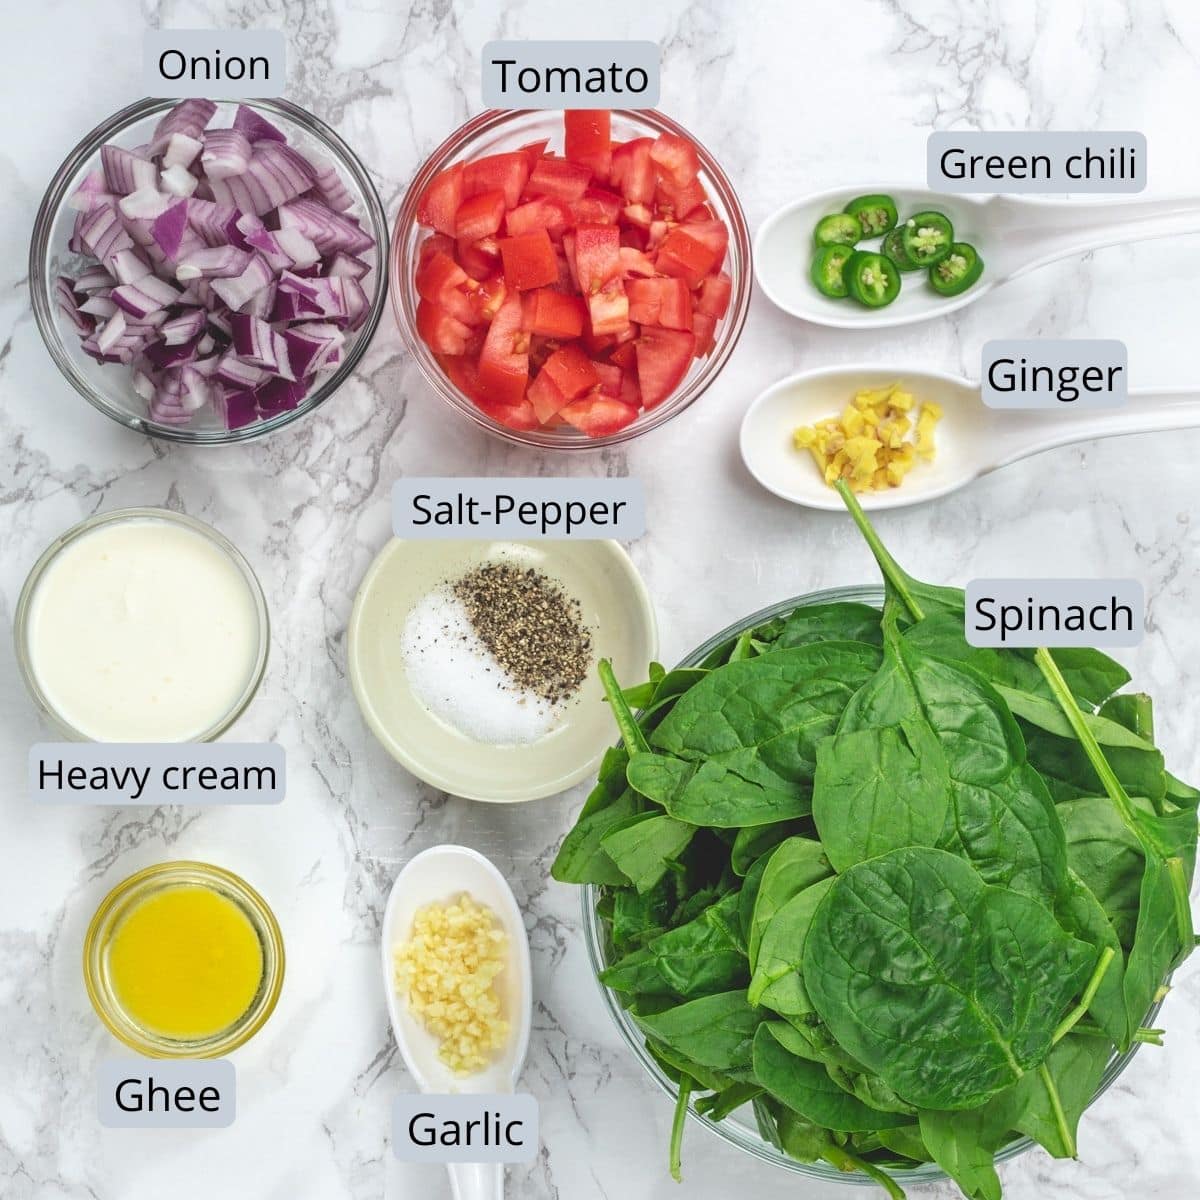 Ingredients used in spinach soup are in individual bowls and spoons.